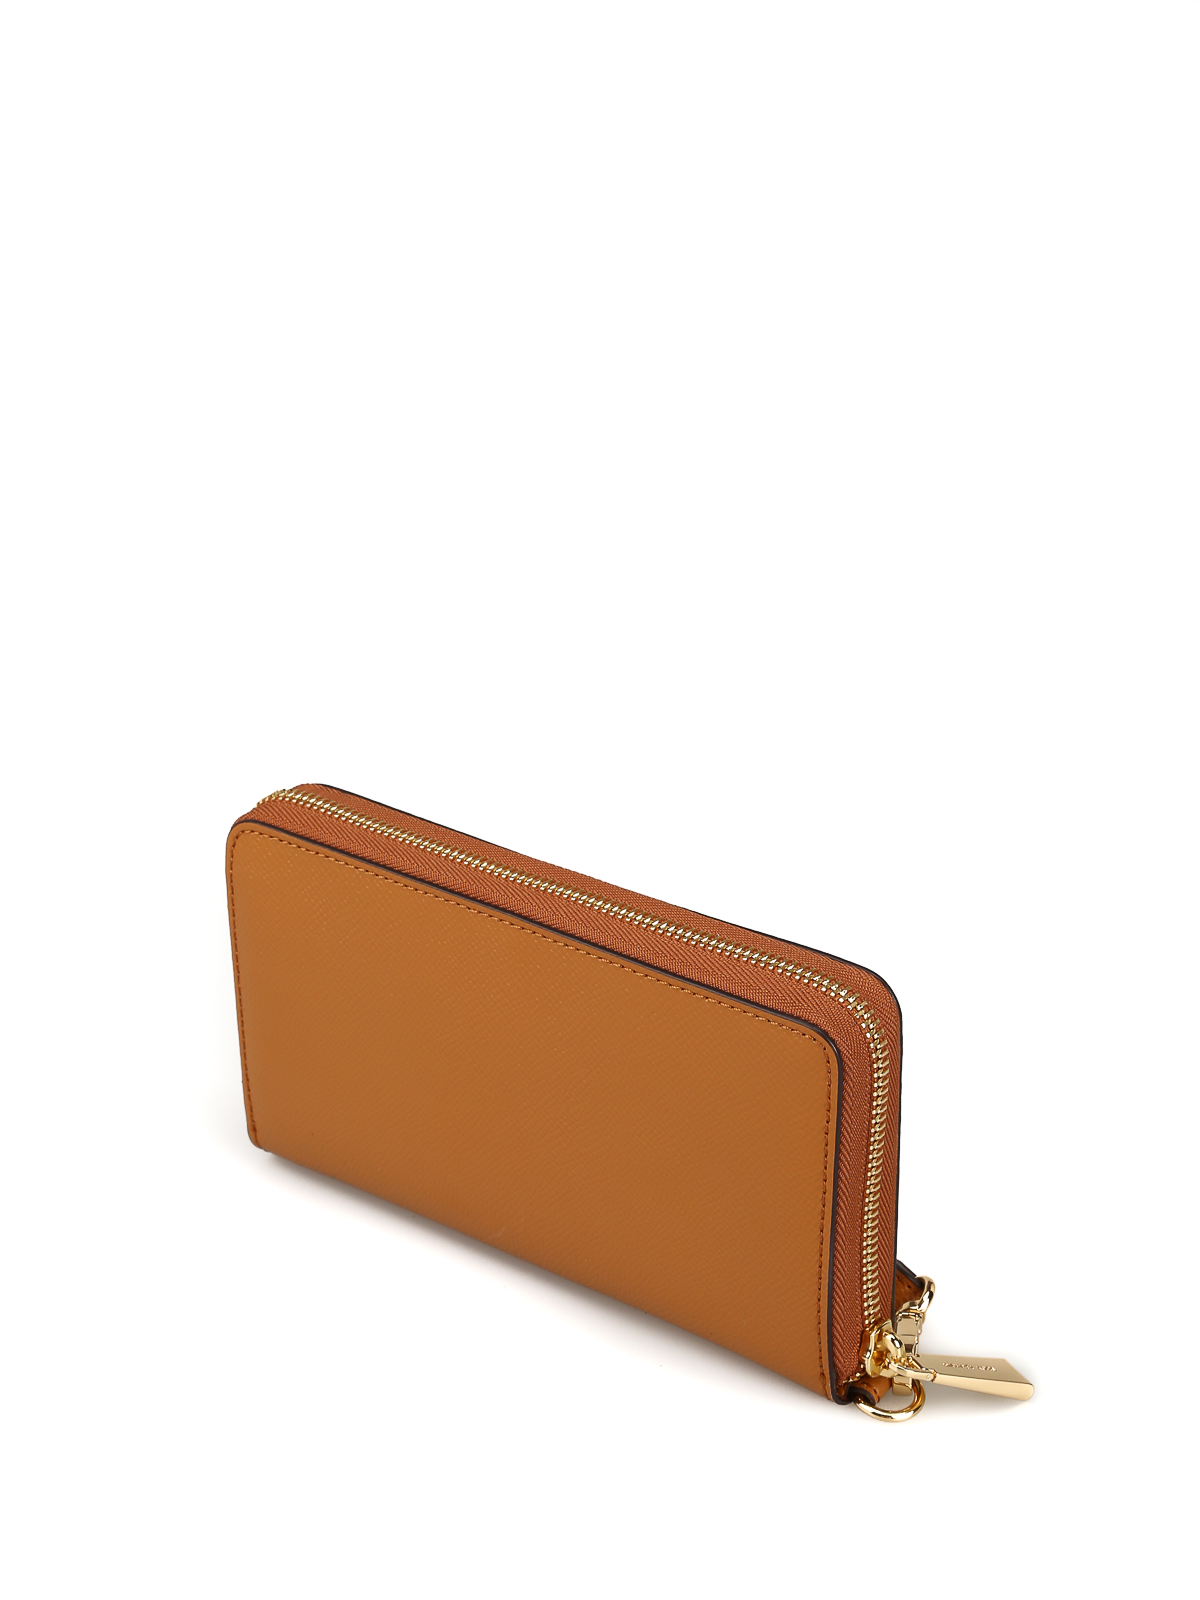 Travel light brown leather wallet 